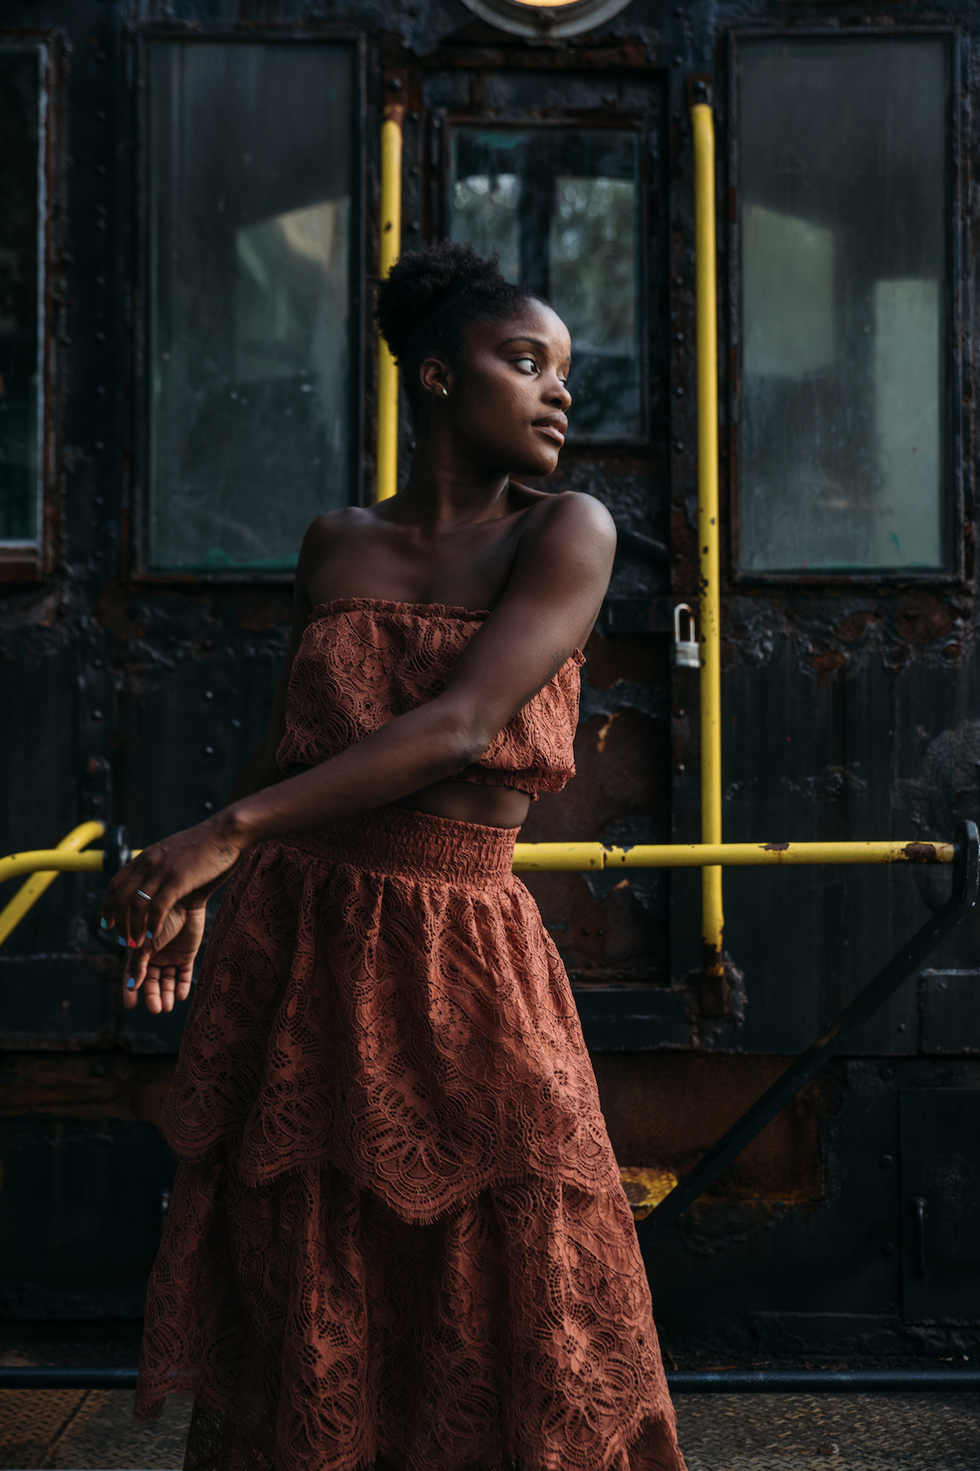 Ingrid Silva stands in front of an old train car, leaning to her left with her hands flowing in the opposite direction.